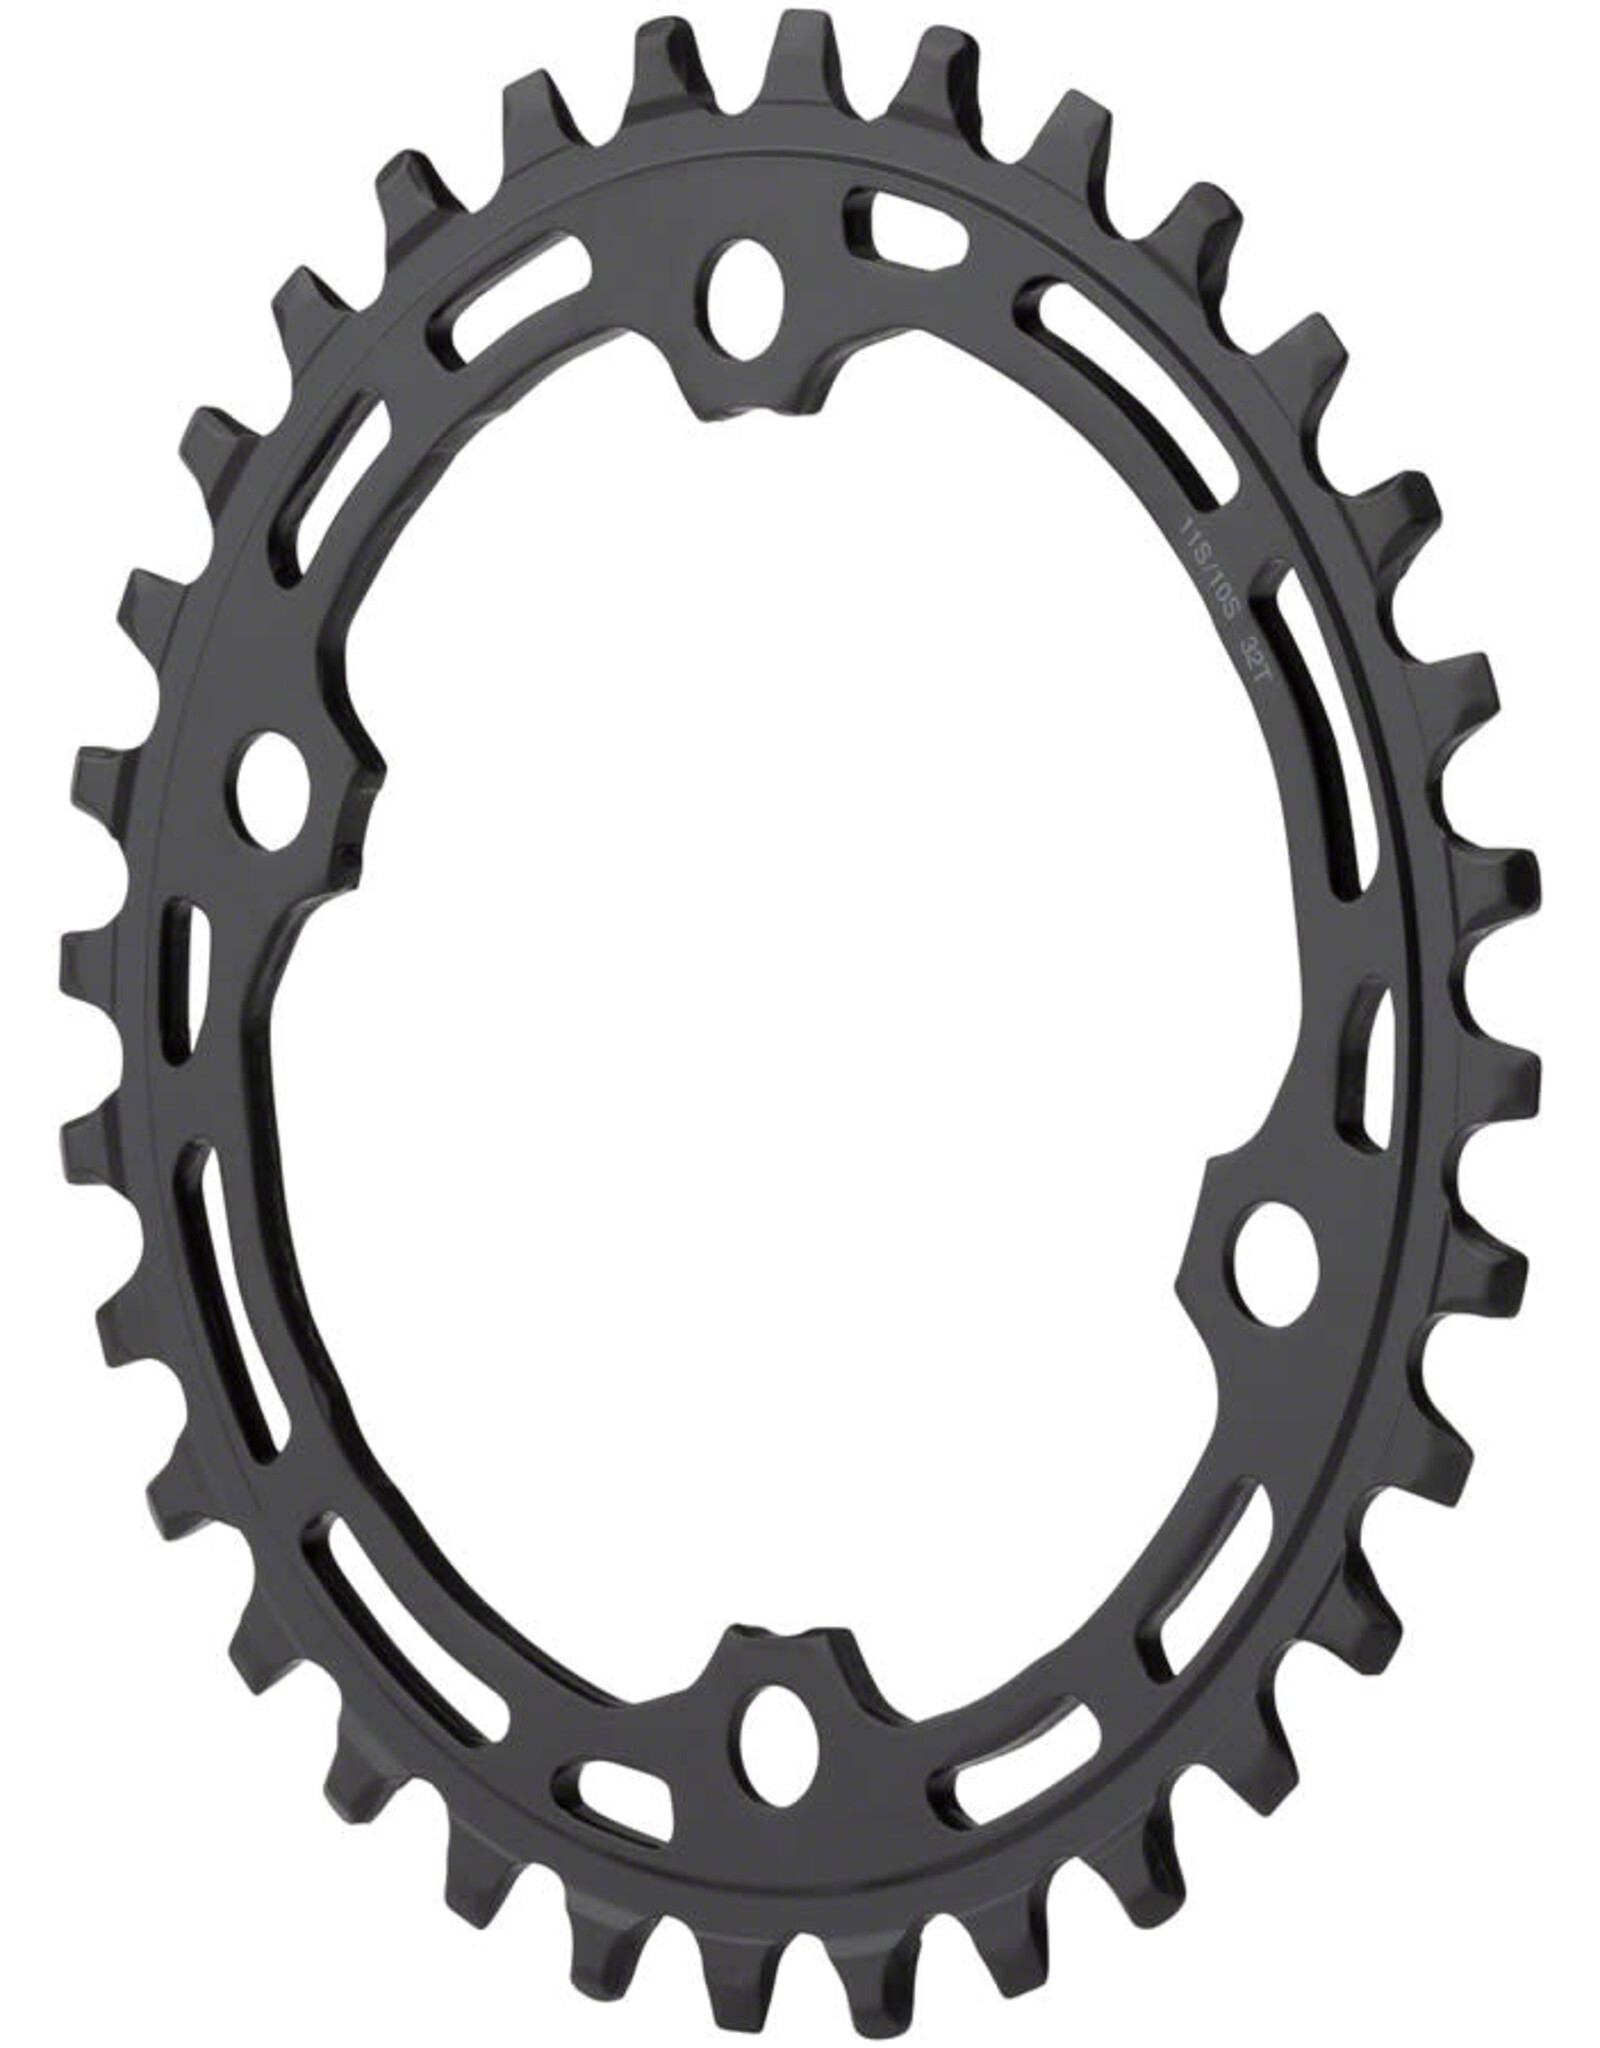 Shimano Shimano Deore M5100-1 Chainring - 30t, 10/11-Speed, Asymmetric 96 BCD, Black